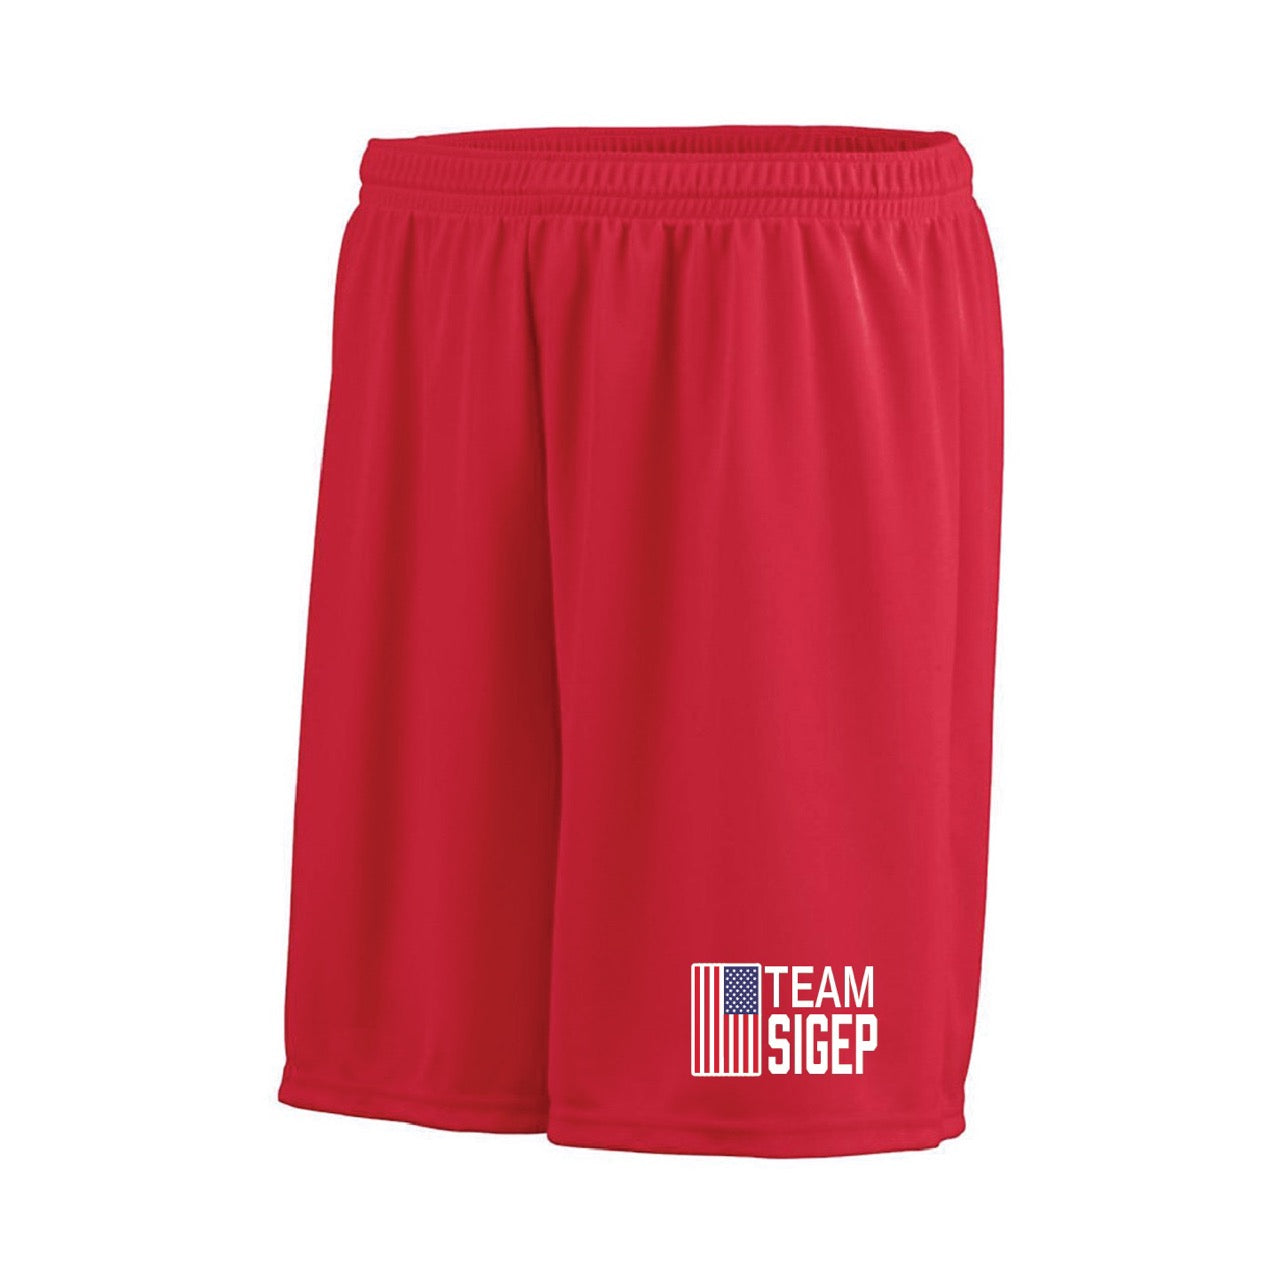 LIMITED PRE-ORDER: Team SigEp Athletic Shorts